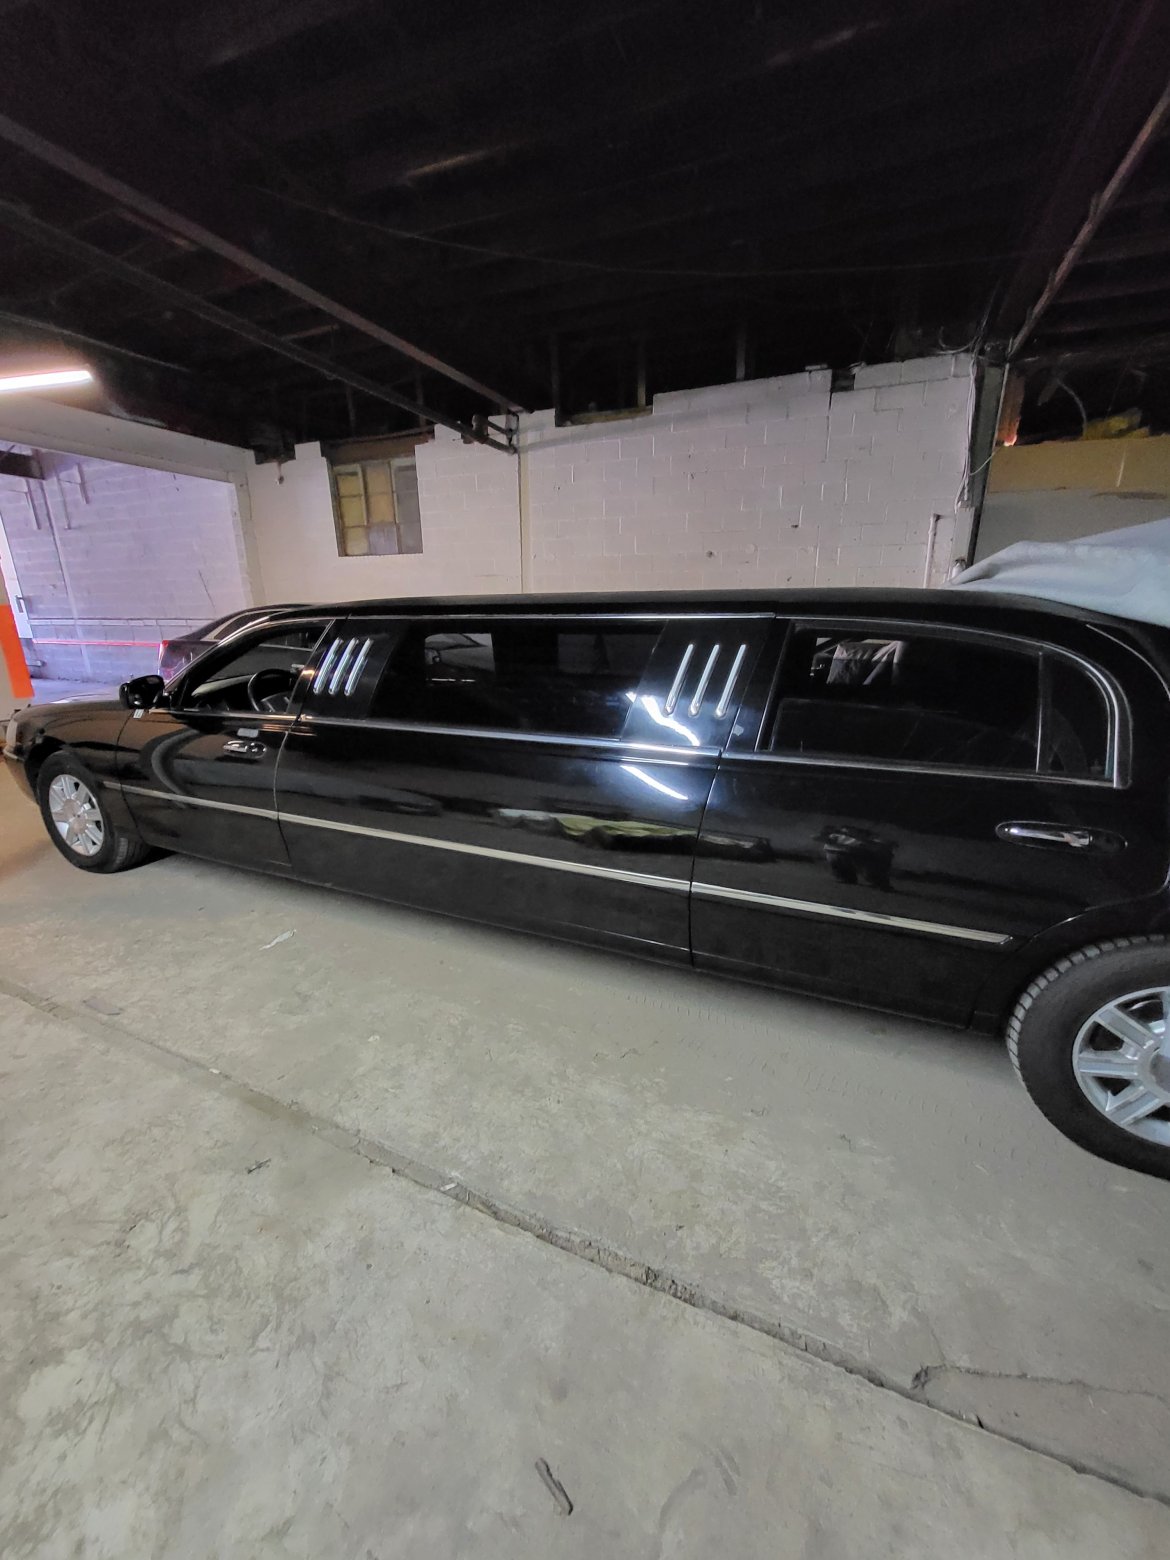 Limousine for sale: 2007 Lincoln Town Car 72&quot; by crystal